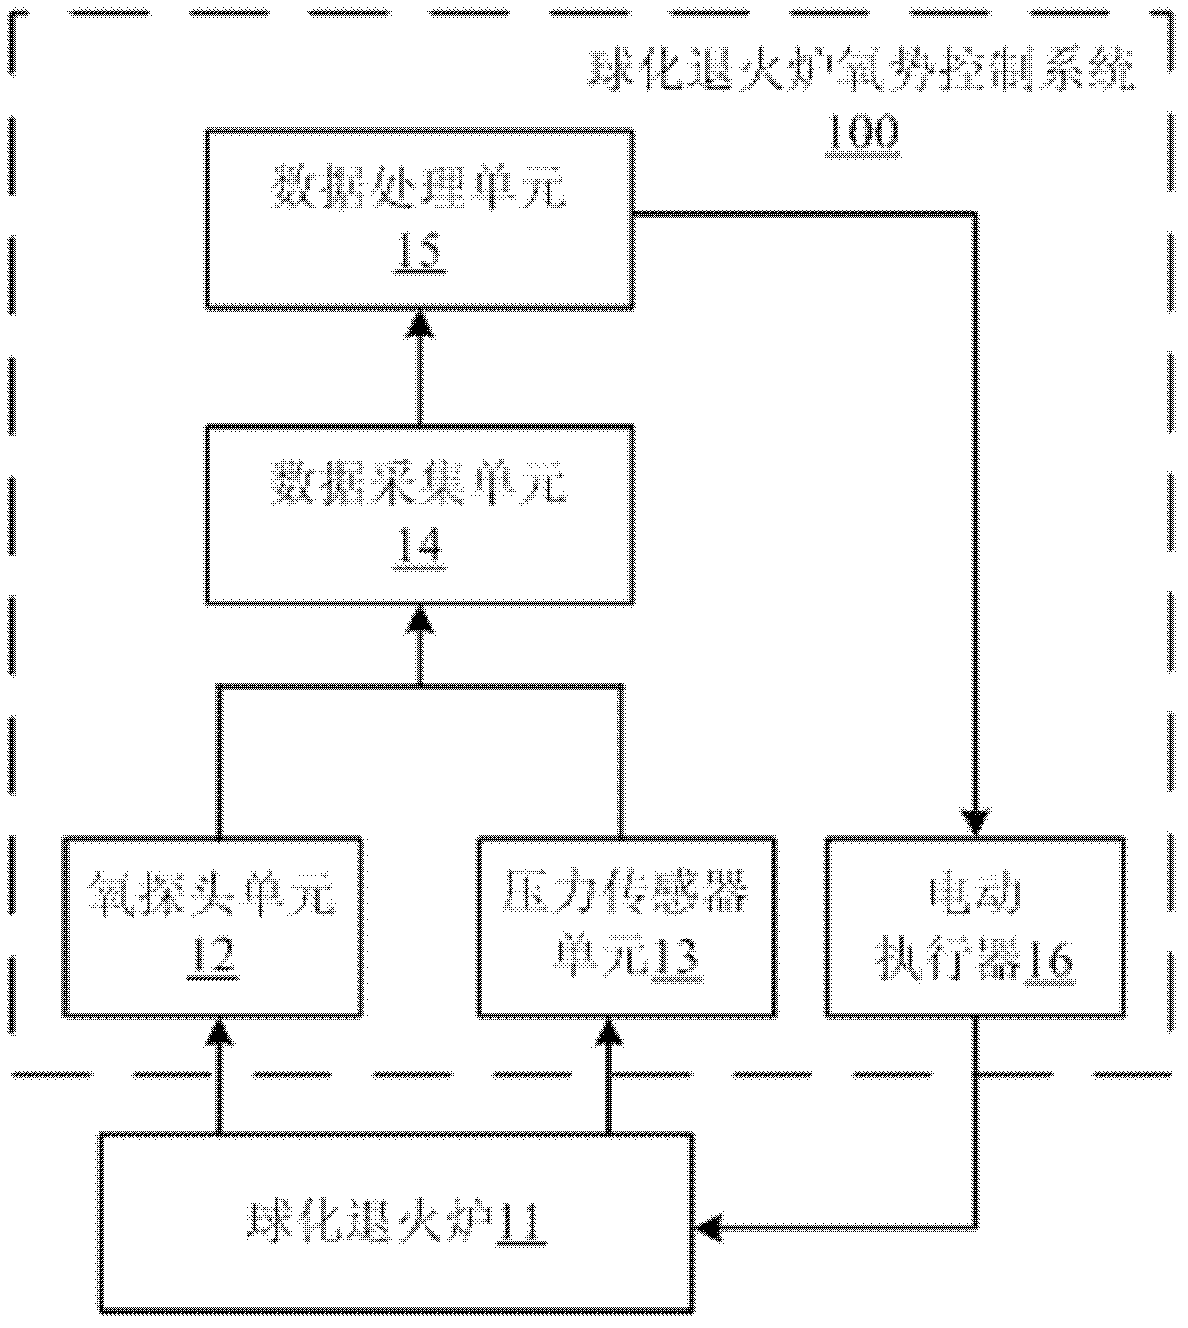 Oxygen potential control system of spheroidizing annealing furnace